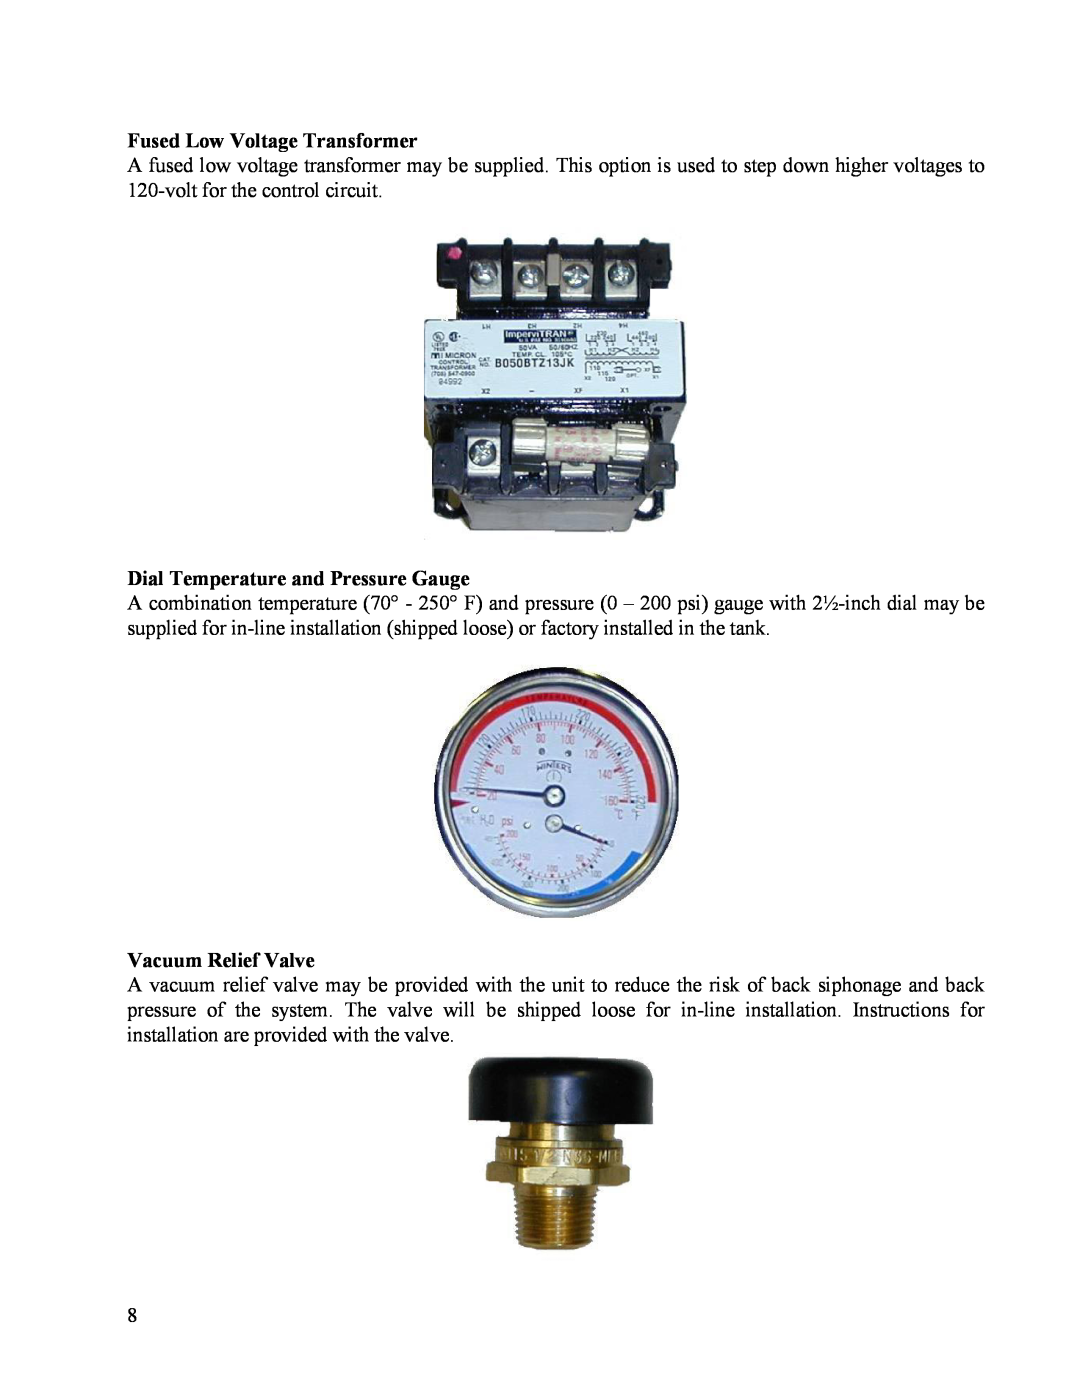 Hubbell Electric Heater Company MSE manual Fused Low Voltage Transformer, Dial Temperature and Pressure Gauge 